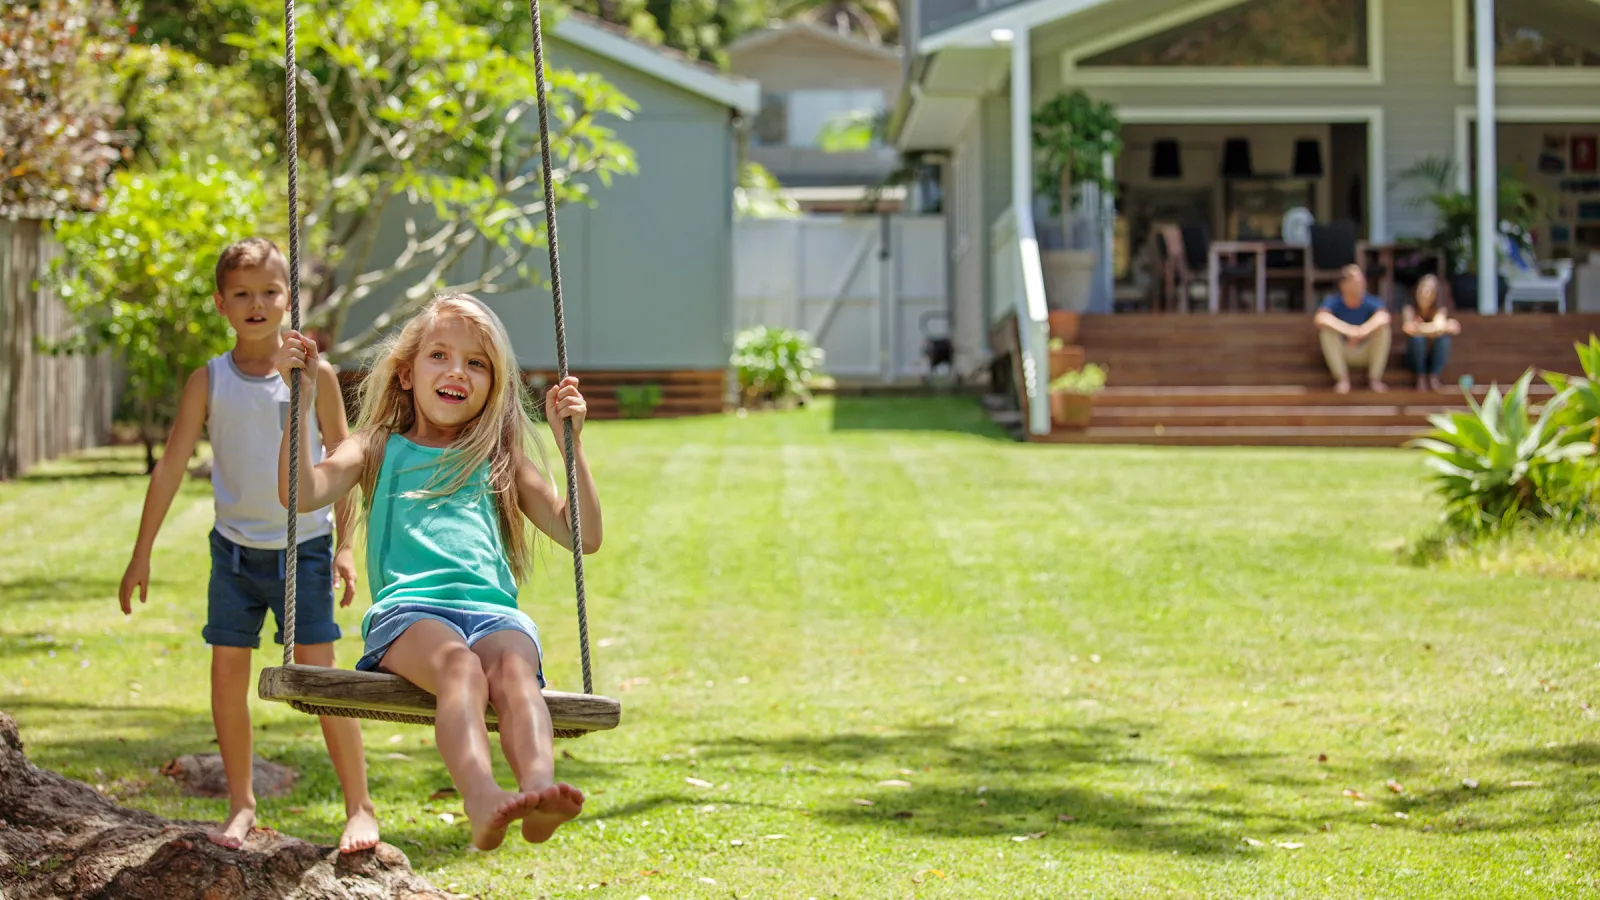 boy pushing girl in swing in front of home